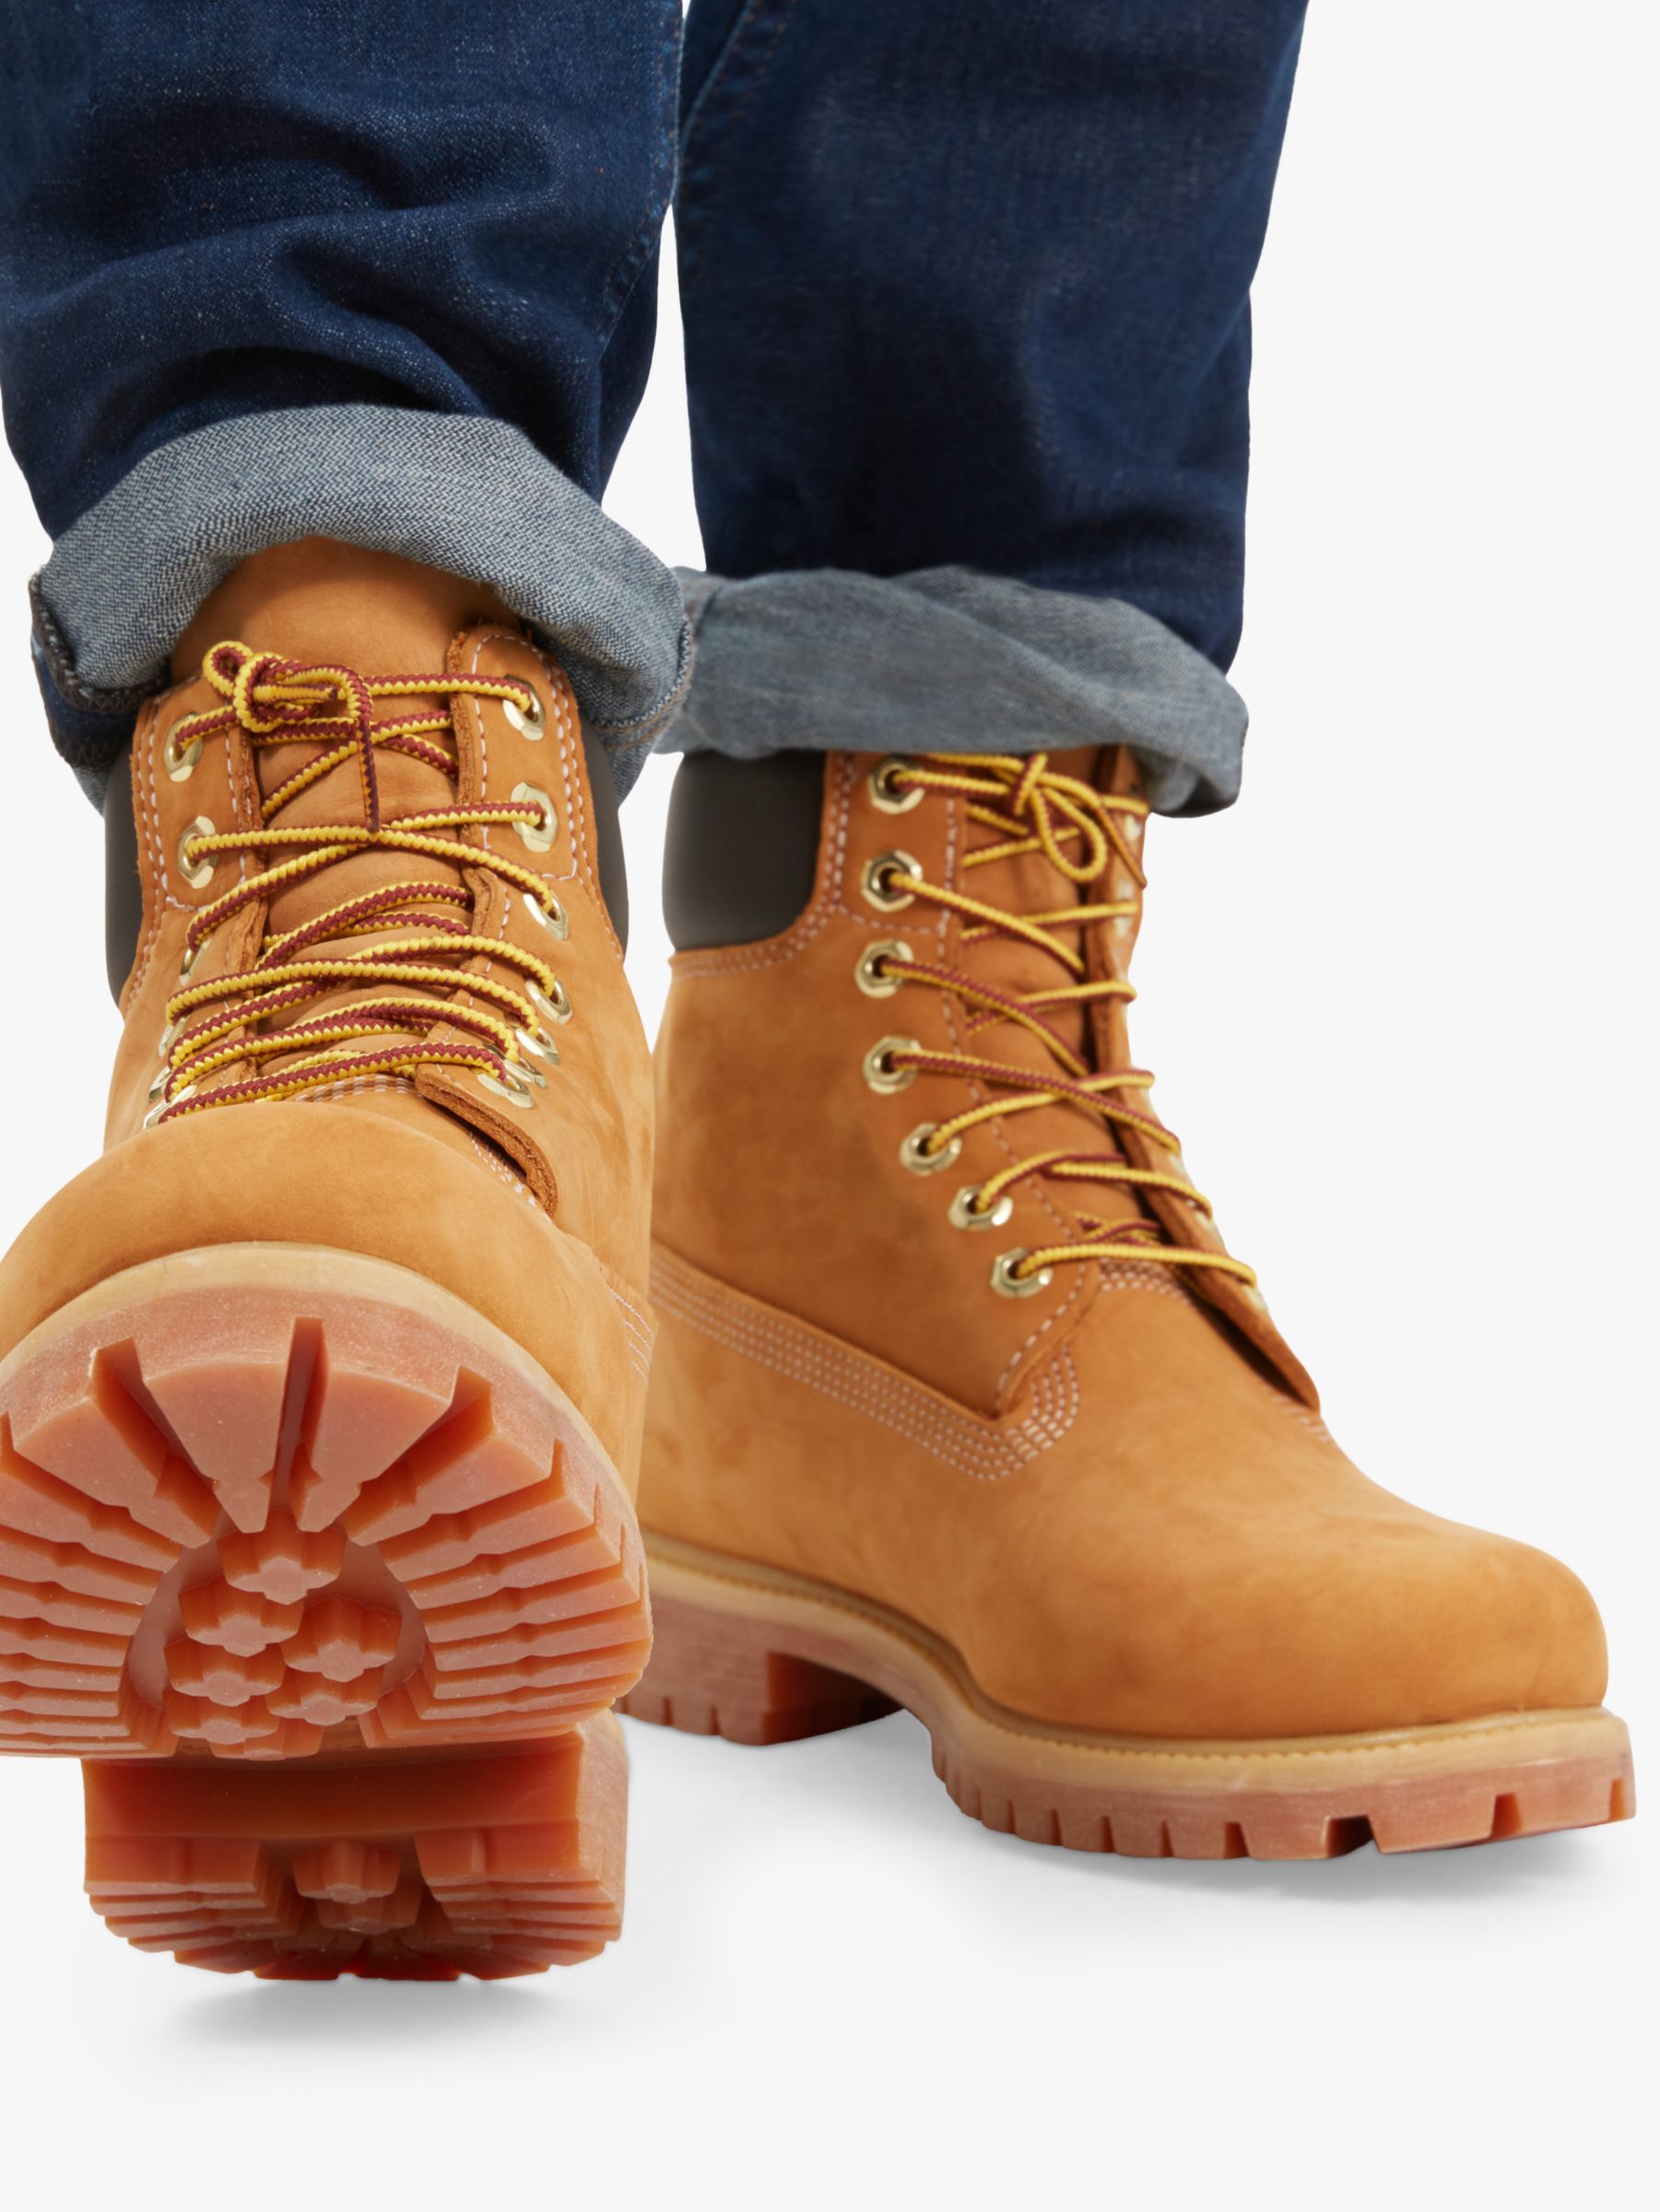 Formación Brote ajedrez Timberland Classic 6-Inch Premium Waterproof Boots, Yellow at John Lewis &  Partners